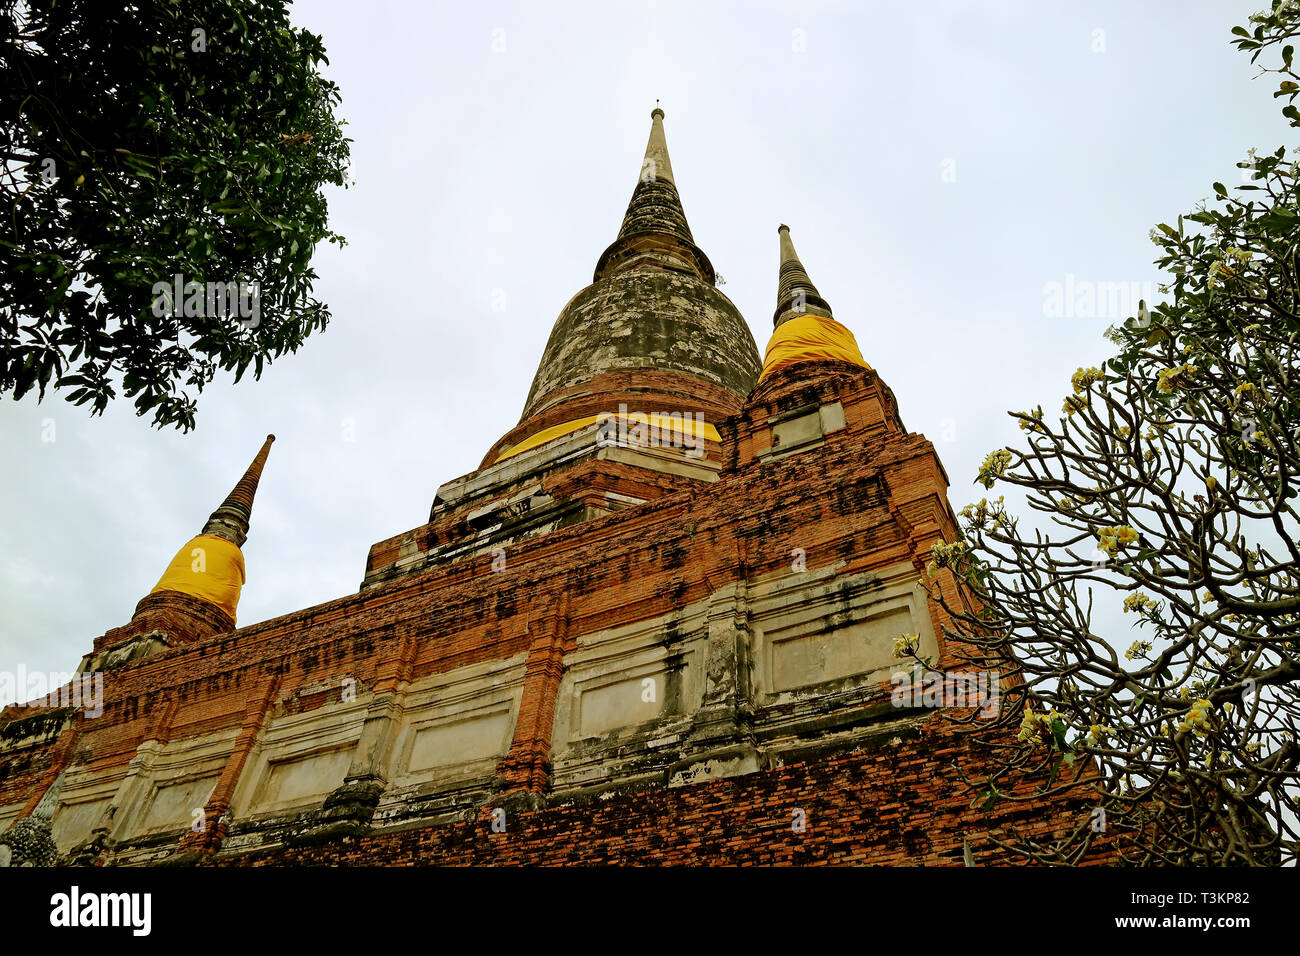 The Historic Stupa or Chedi of Wat Yai Chai Mongkhon Temple against Cloudy Sky, Ayutthaya Archaeological site, Thailand Stock Photo